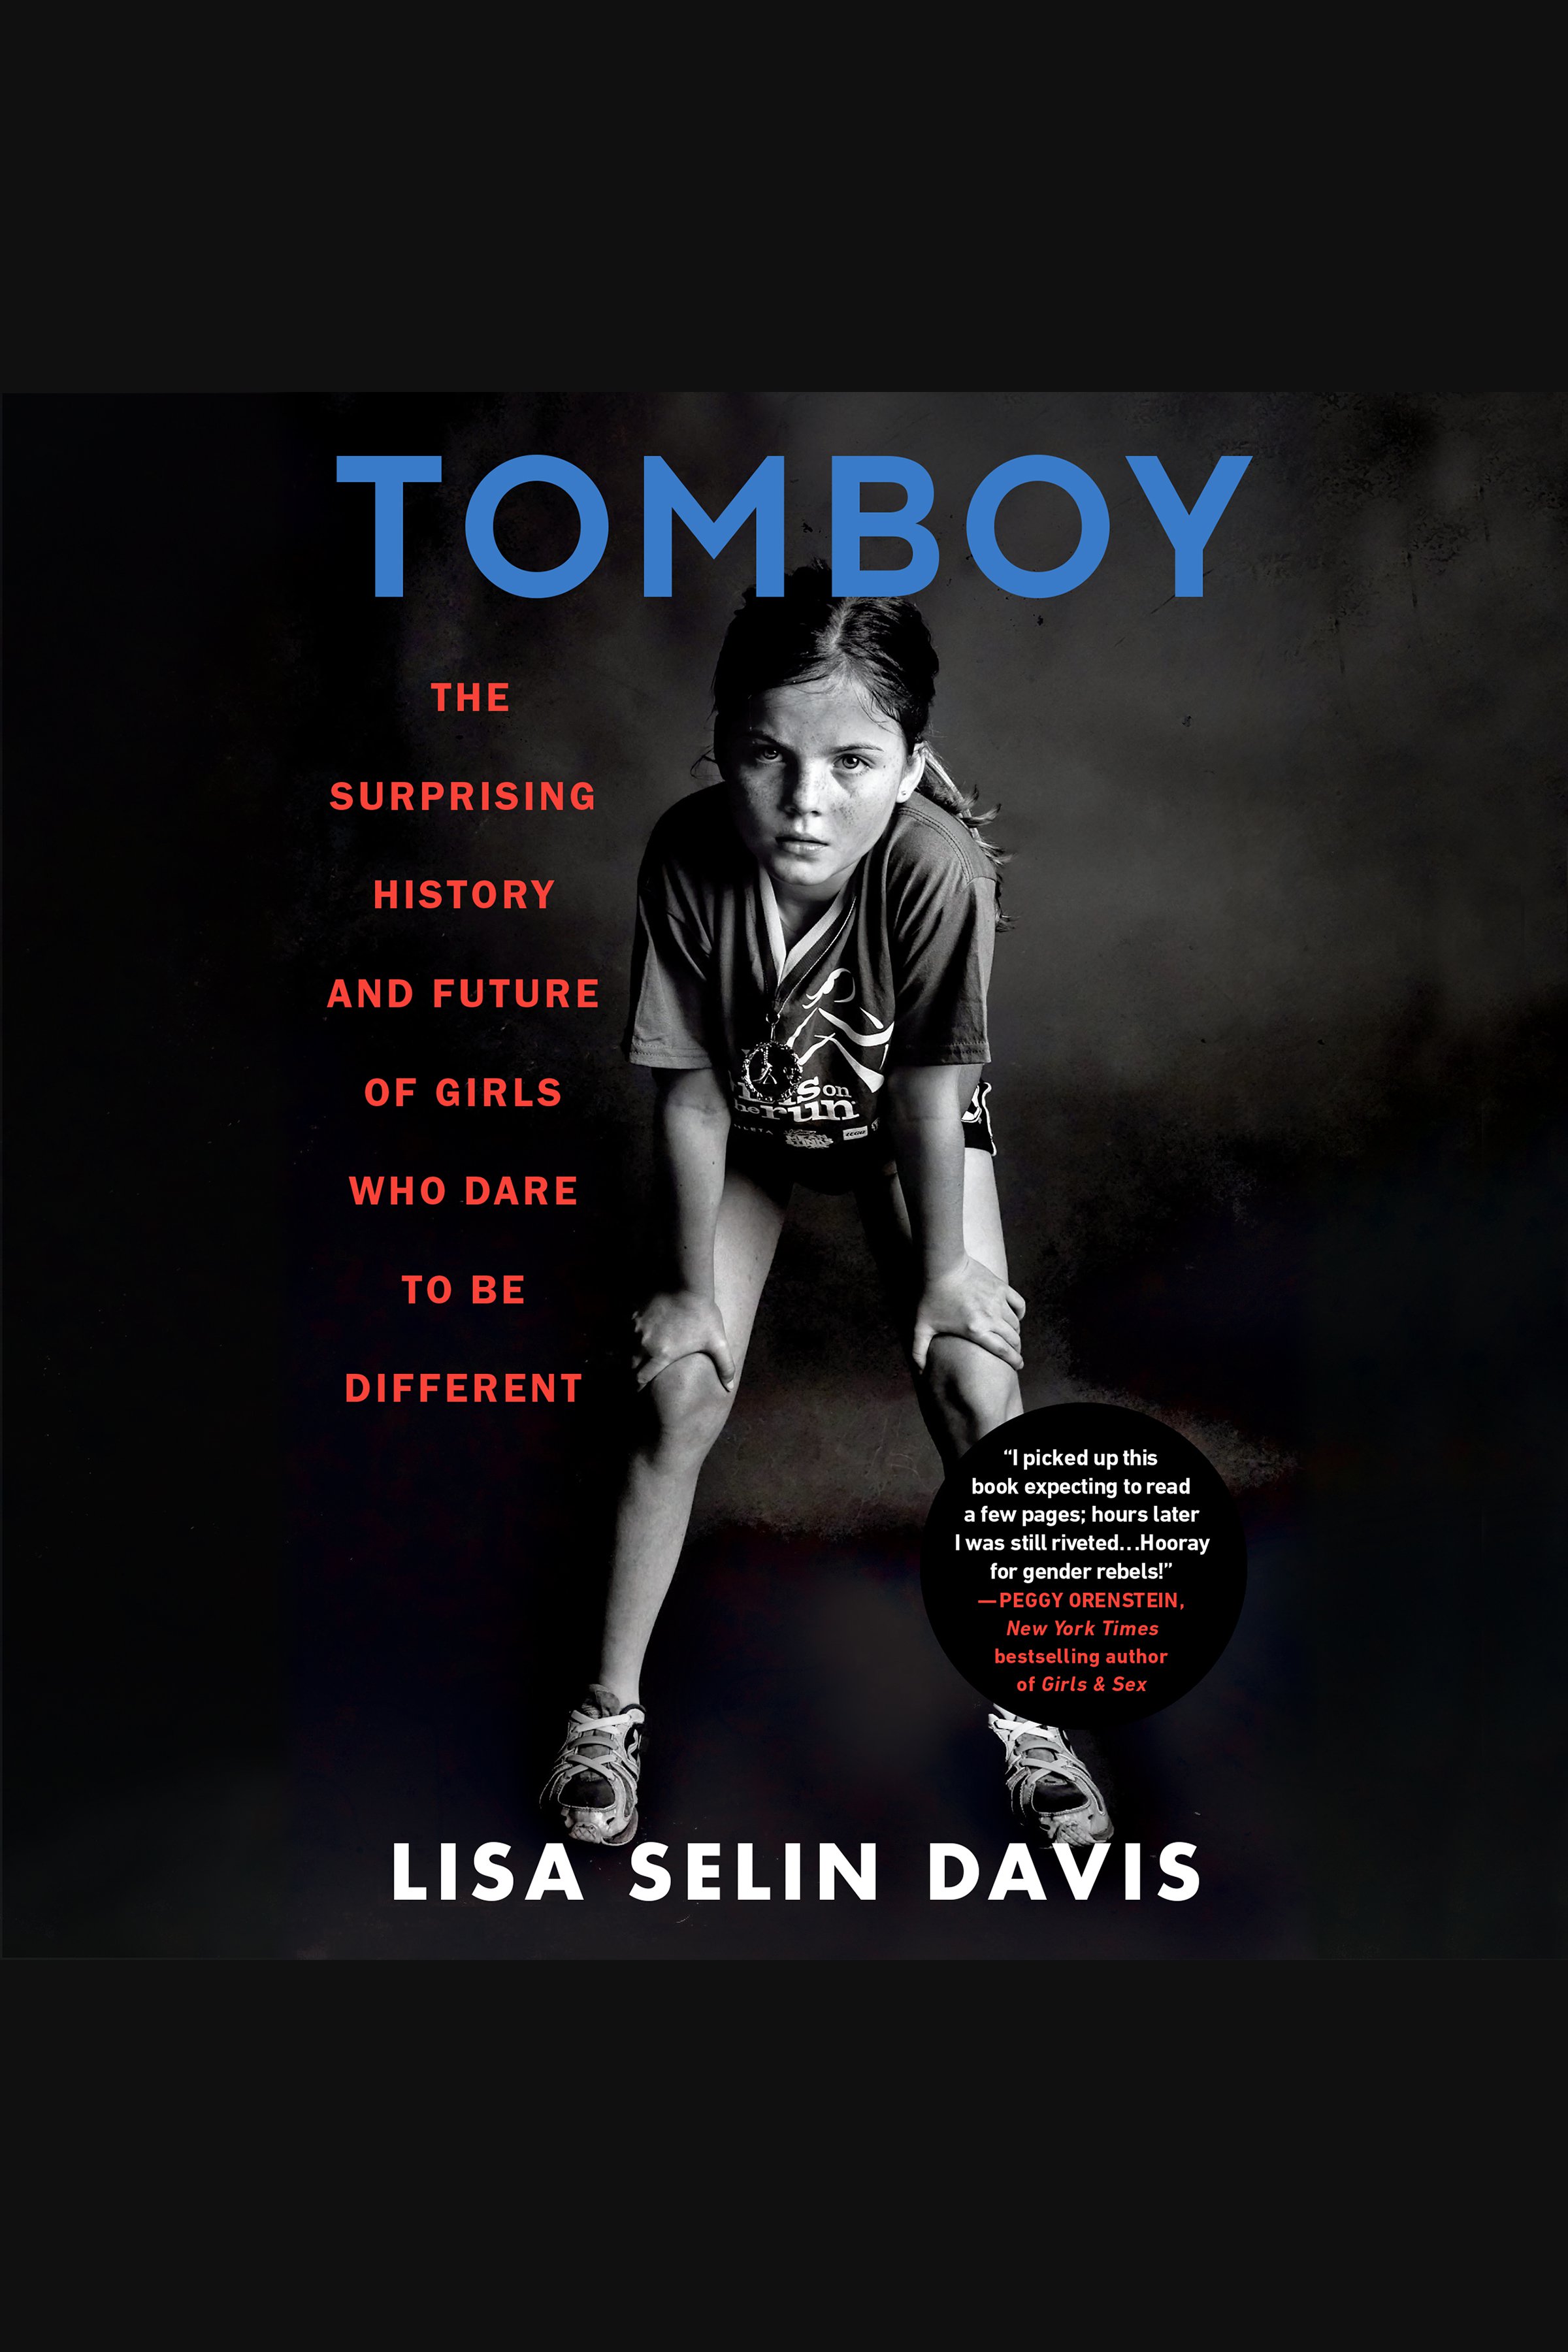 Tomboy The Surprising History and Future of Girls Who Dare to Be Different cover image